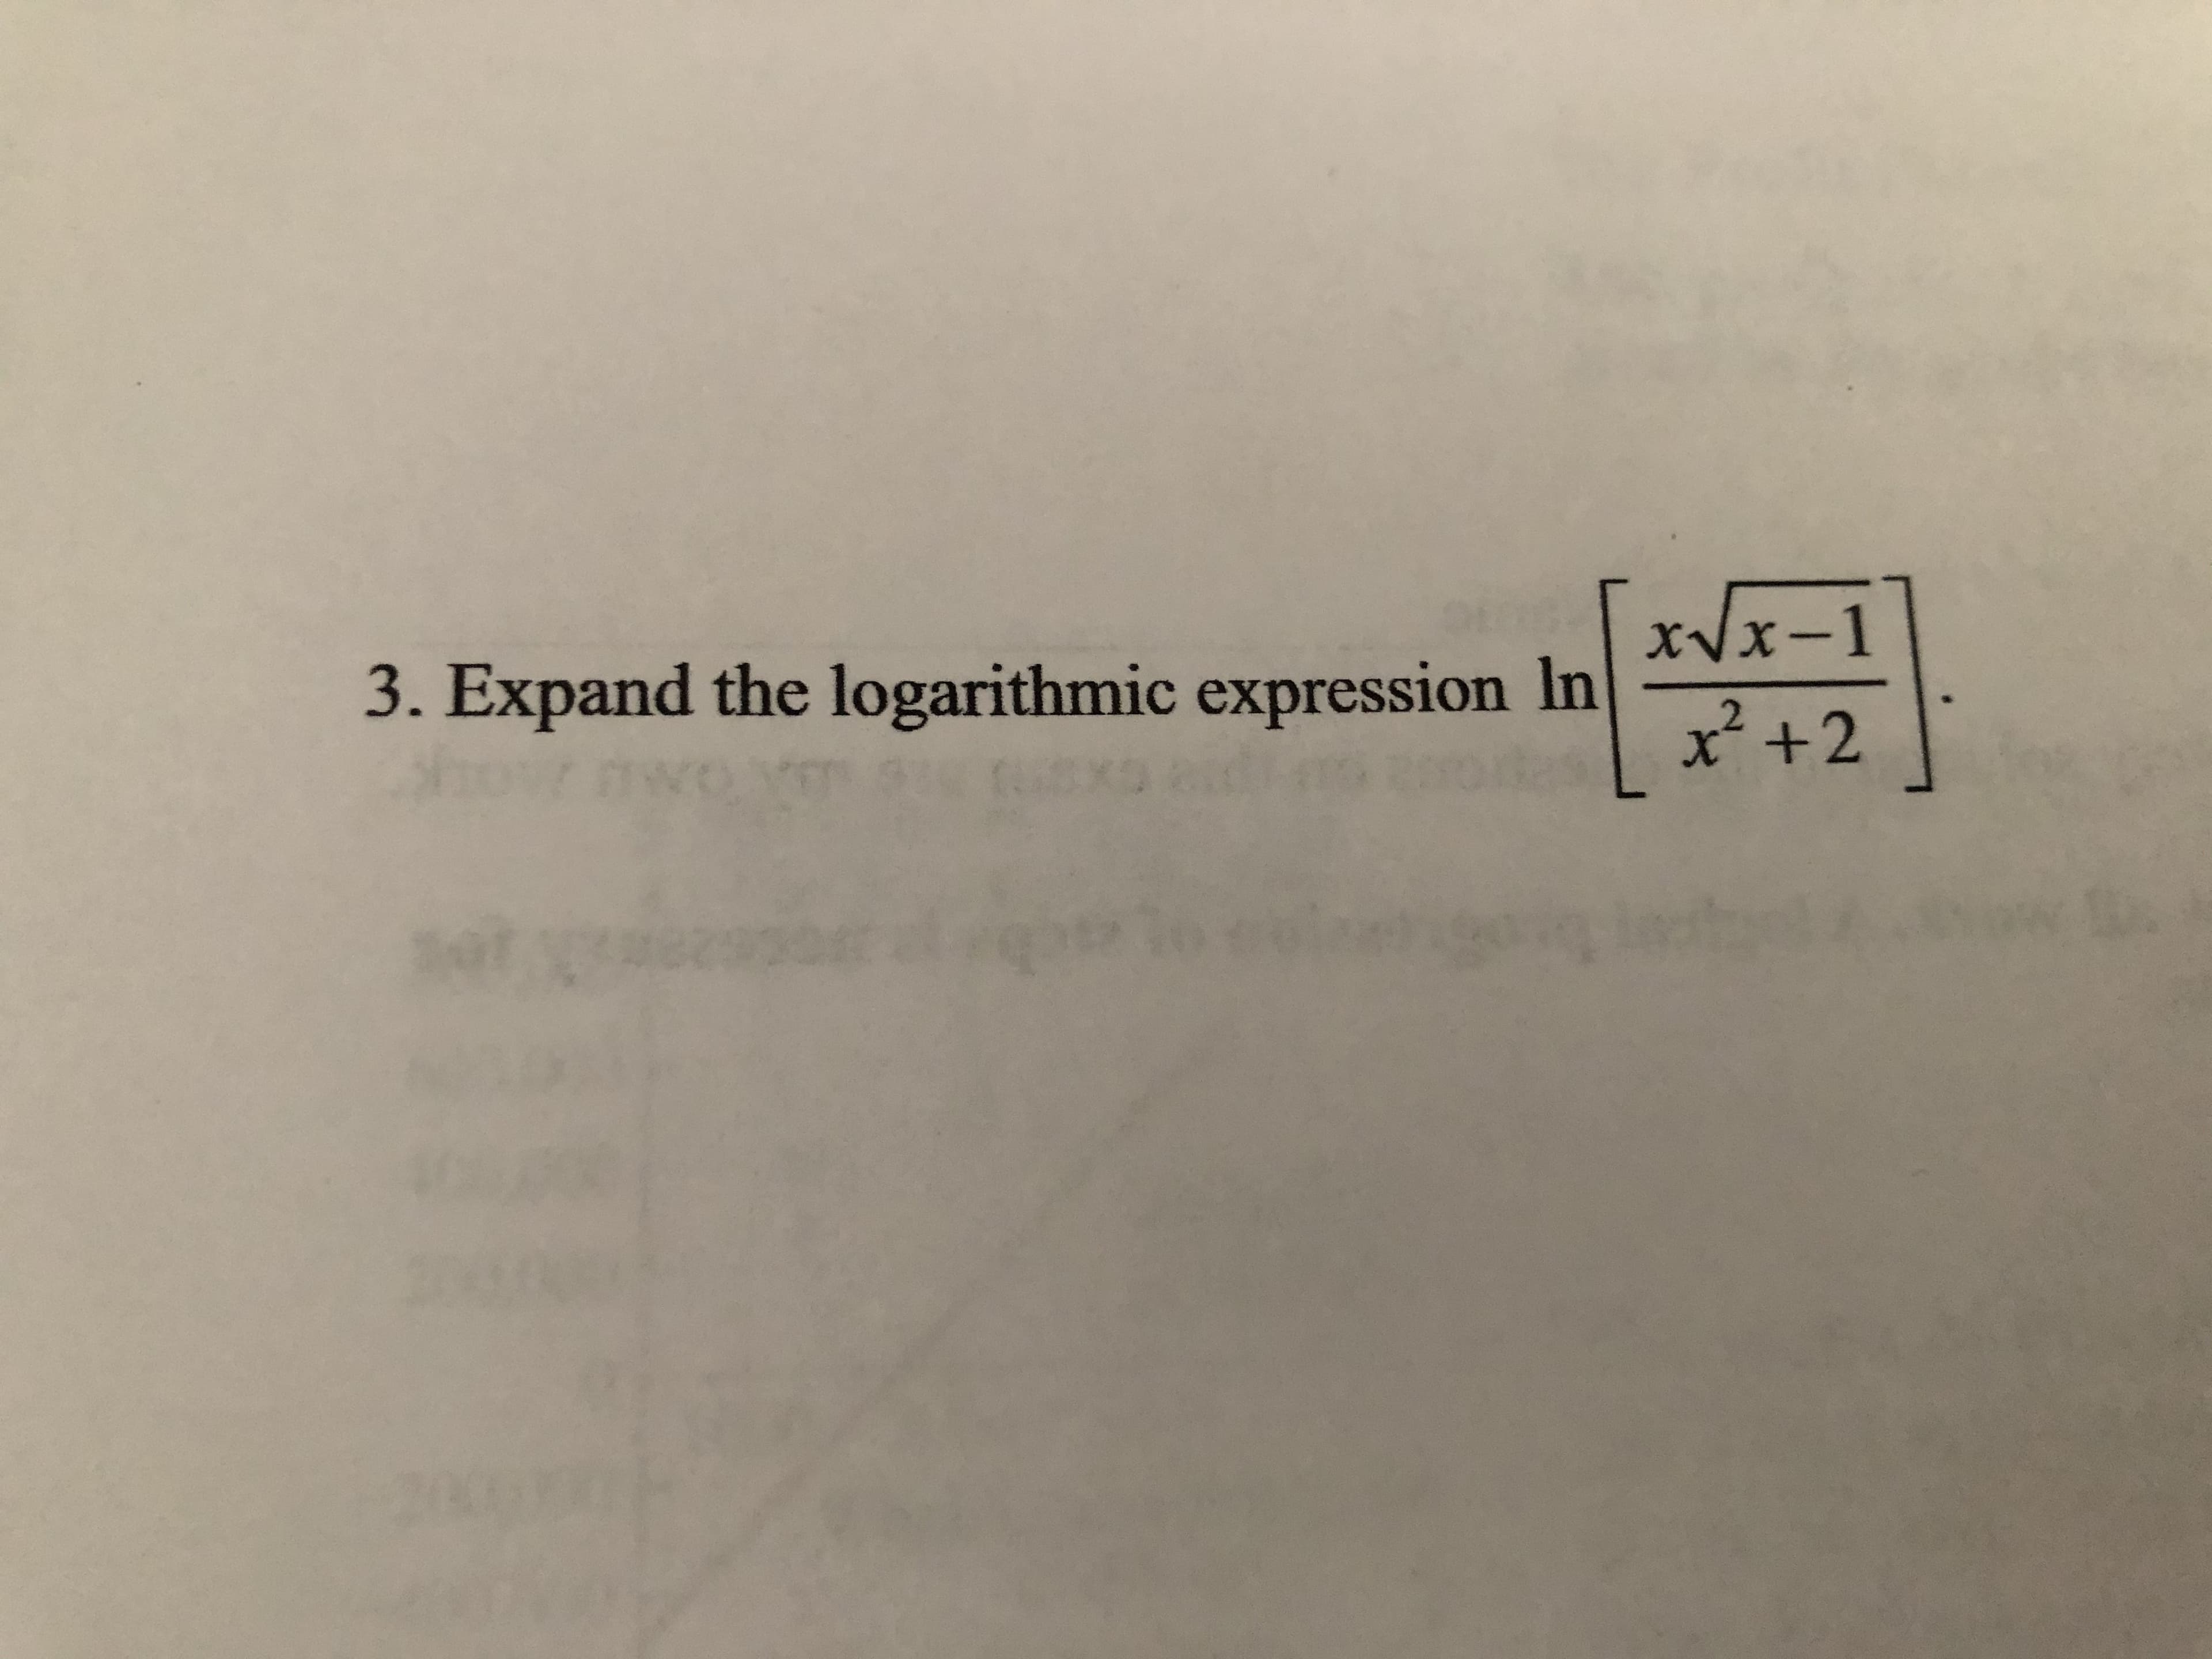 xVx-1
3. Expand the logarithmic expression In
x² +2
